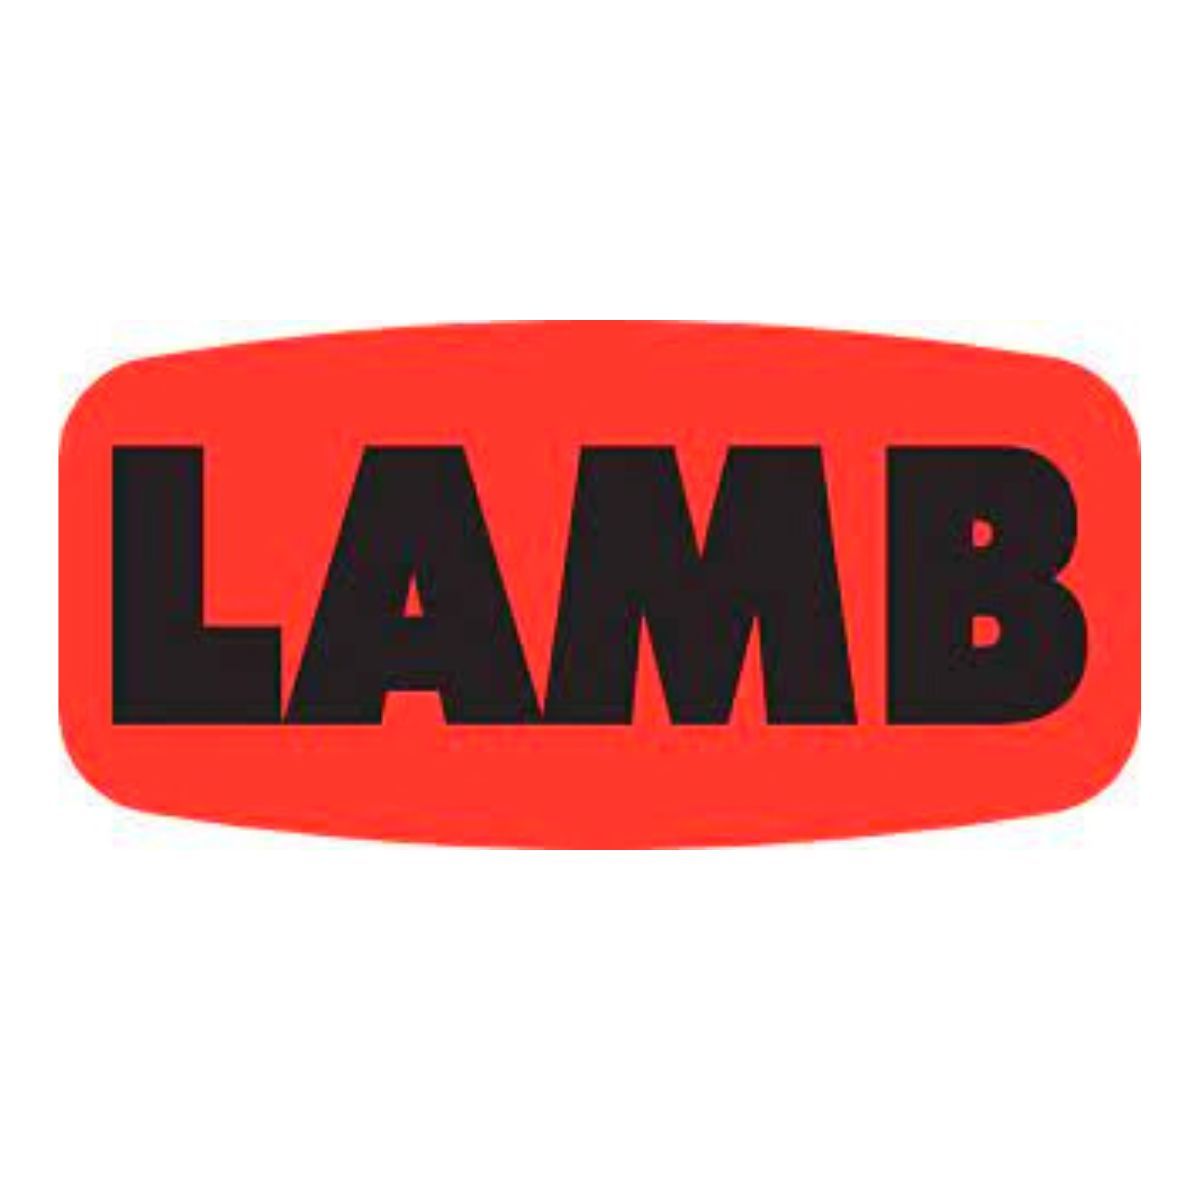 Bollin Label 12134 - Lamb Short Oval Black on Red - Roll of 1000